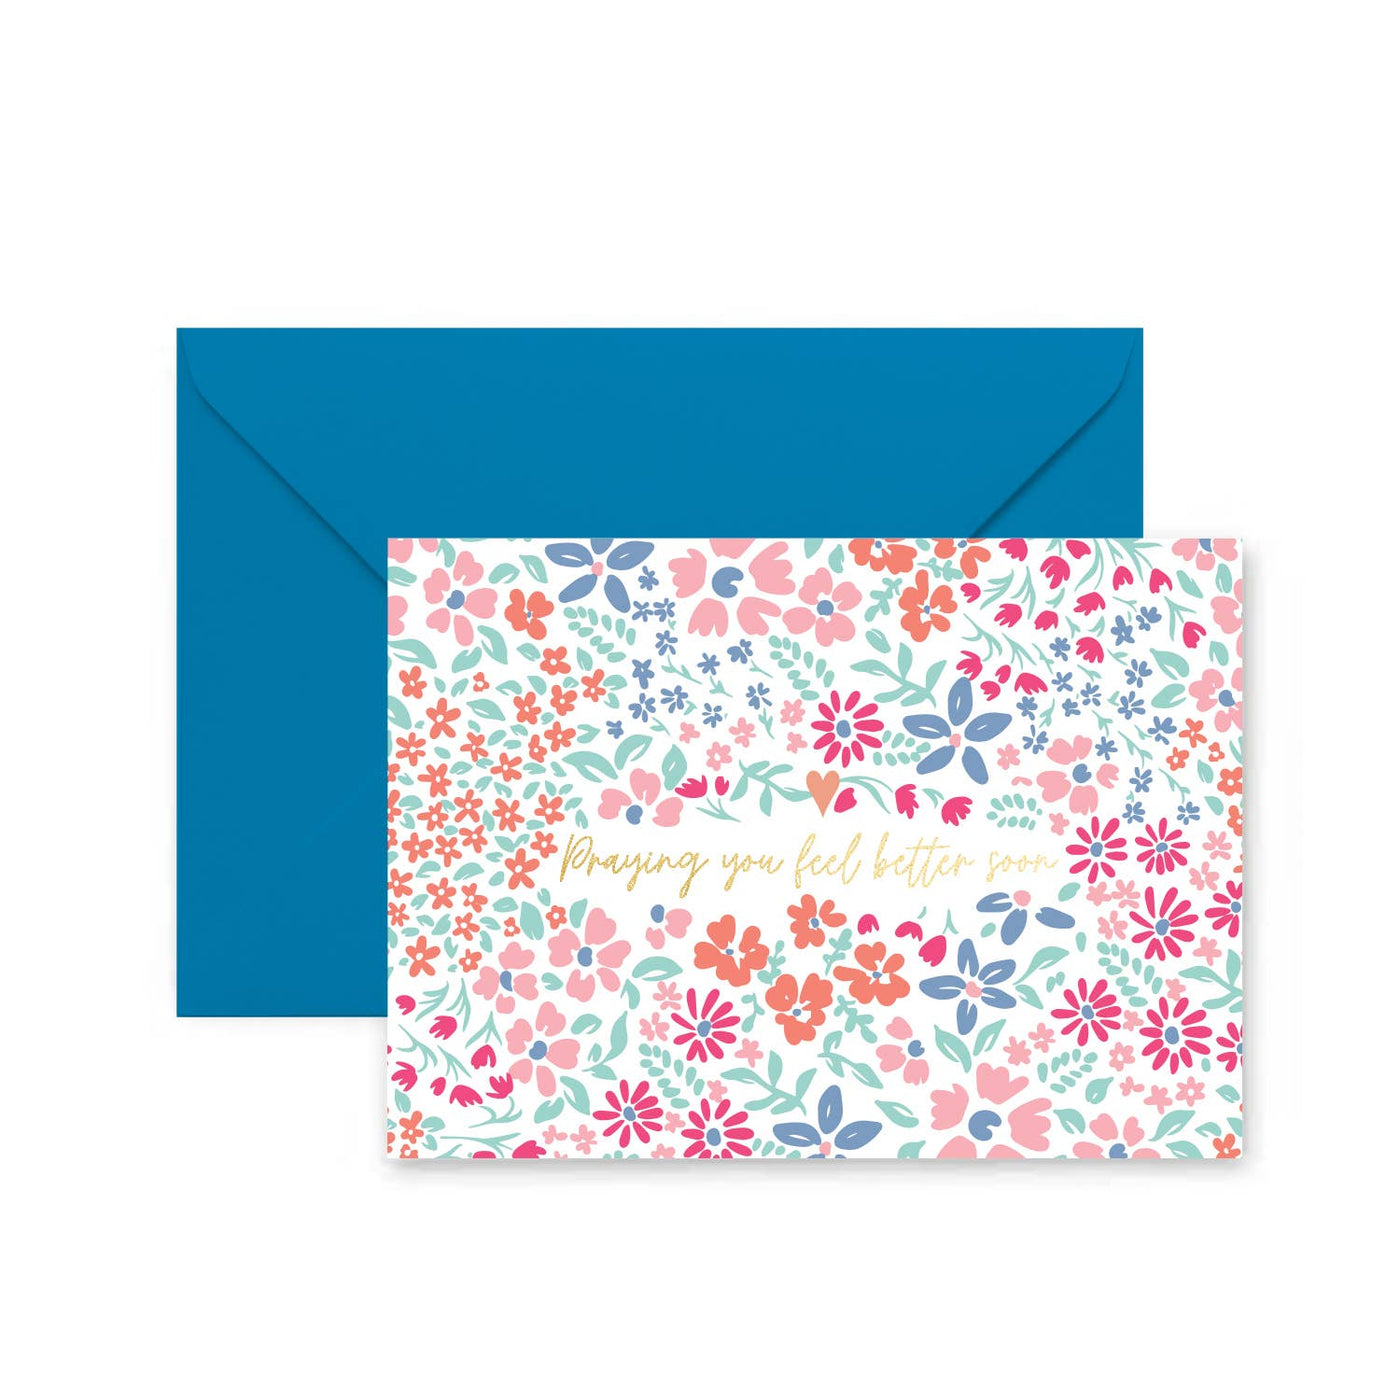 Greeting Card Feel Better Floral